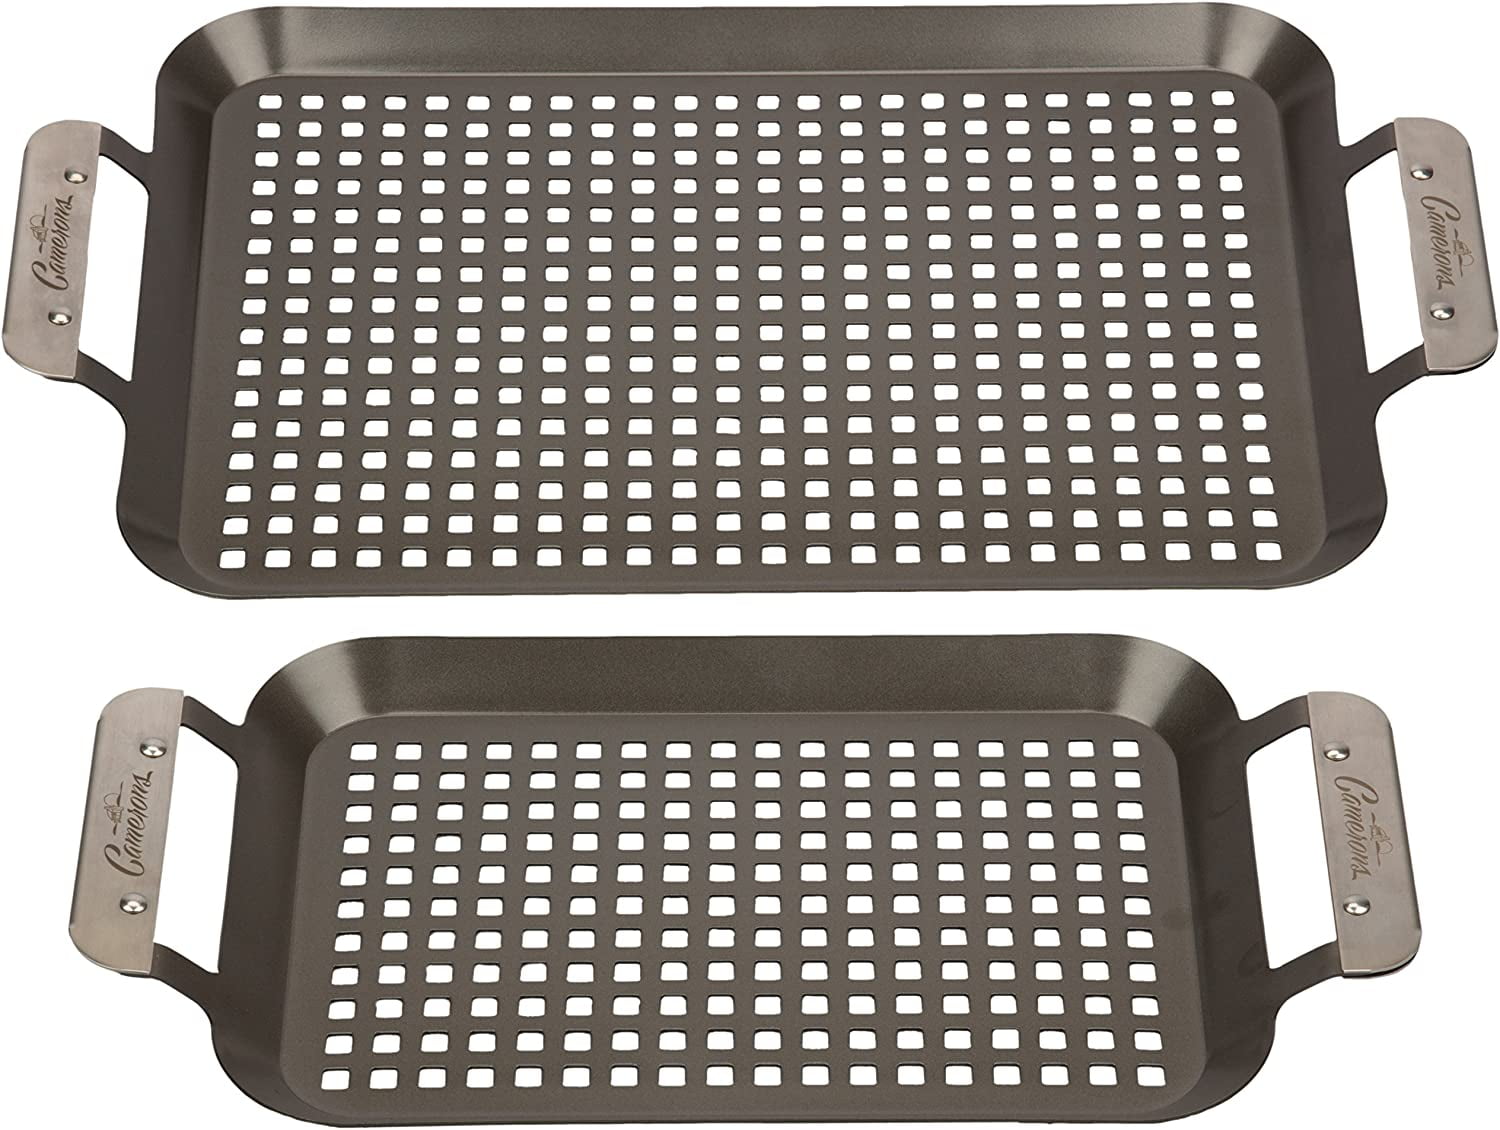 2PCS Grill Topper Pans BBQ ACETOP Nonstick Barbecue Grilling Baskets  Outdoor Stainless Steel BBQ Grill Tray with Perforated Bottom for Indoor  Camping